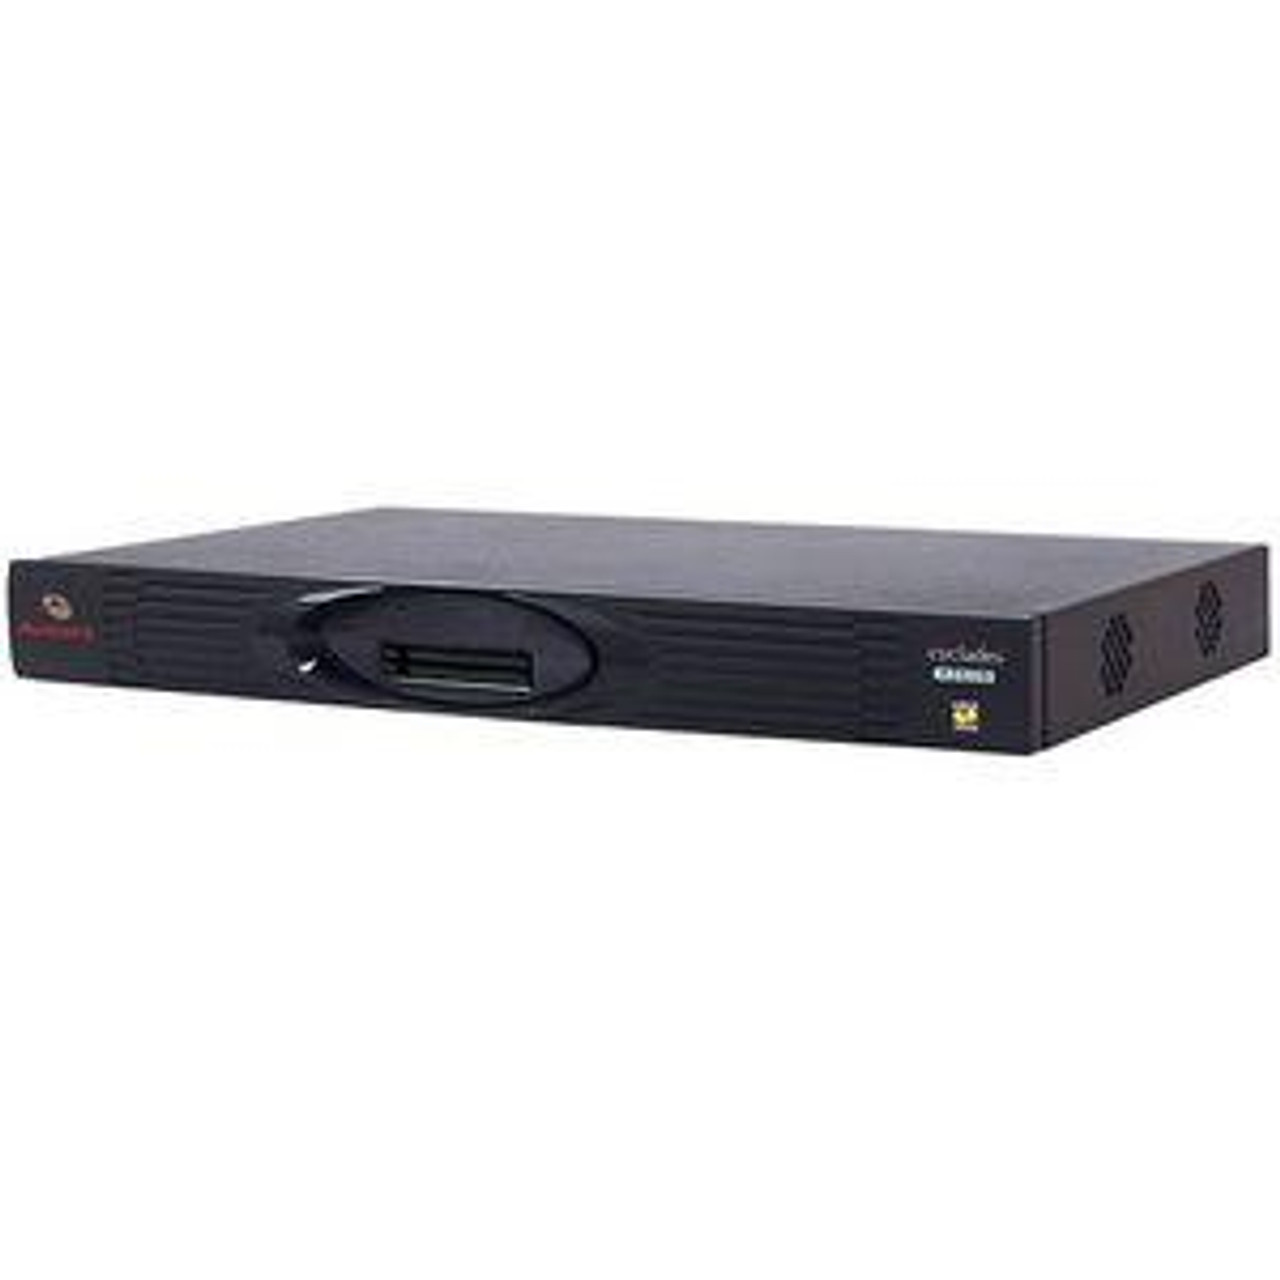 ATP0190-001 Avocent Cyclades 48-Ports AlterPath ACS 48 Console Server Plus Dual Power Supply